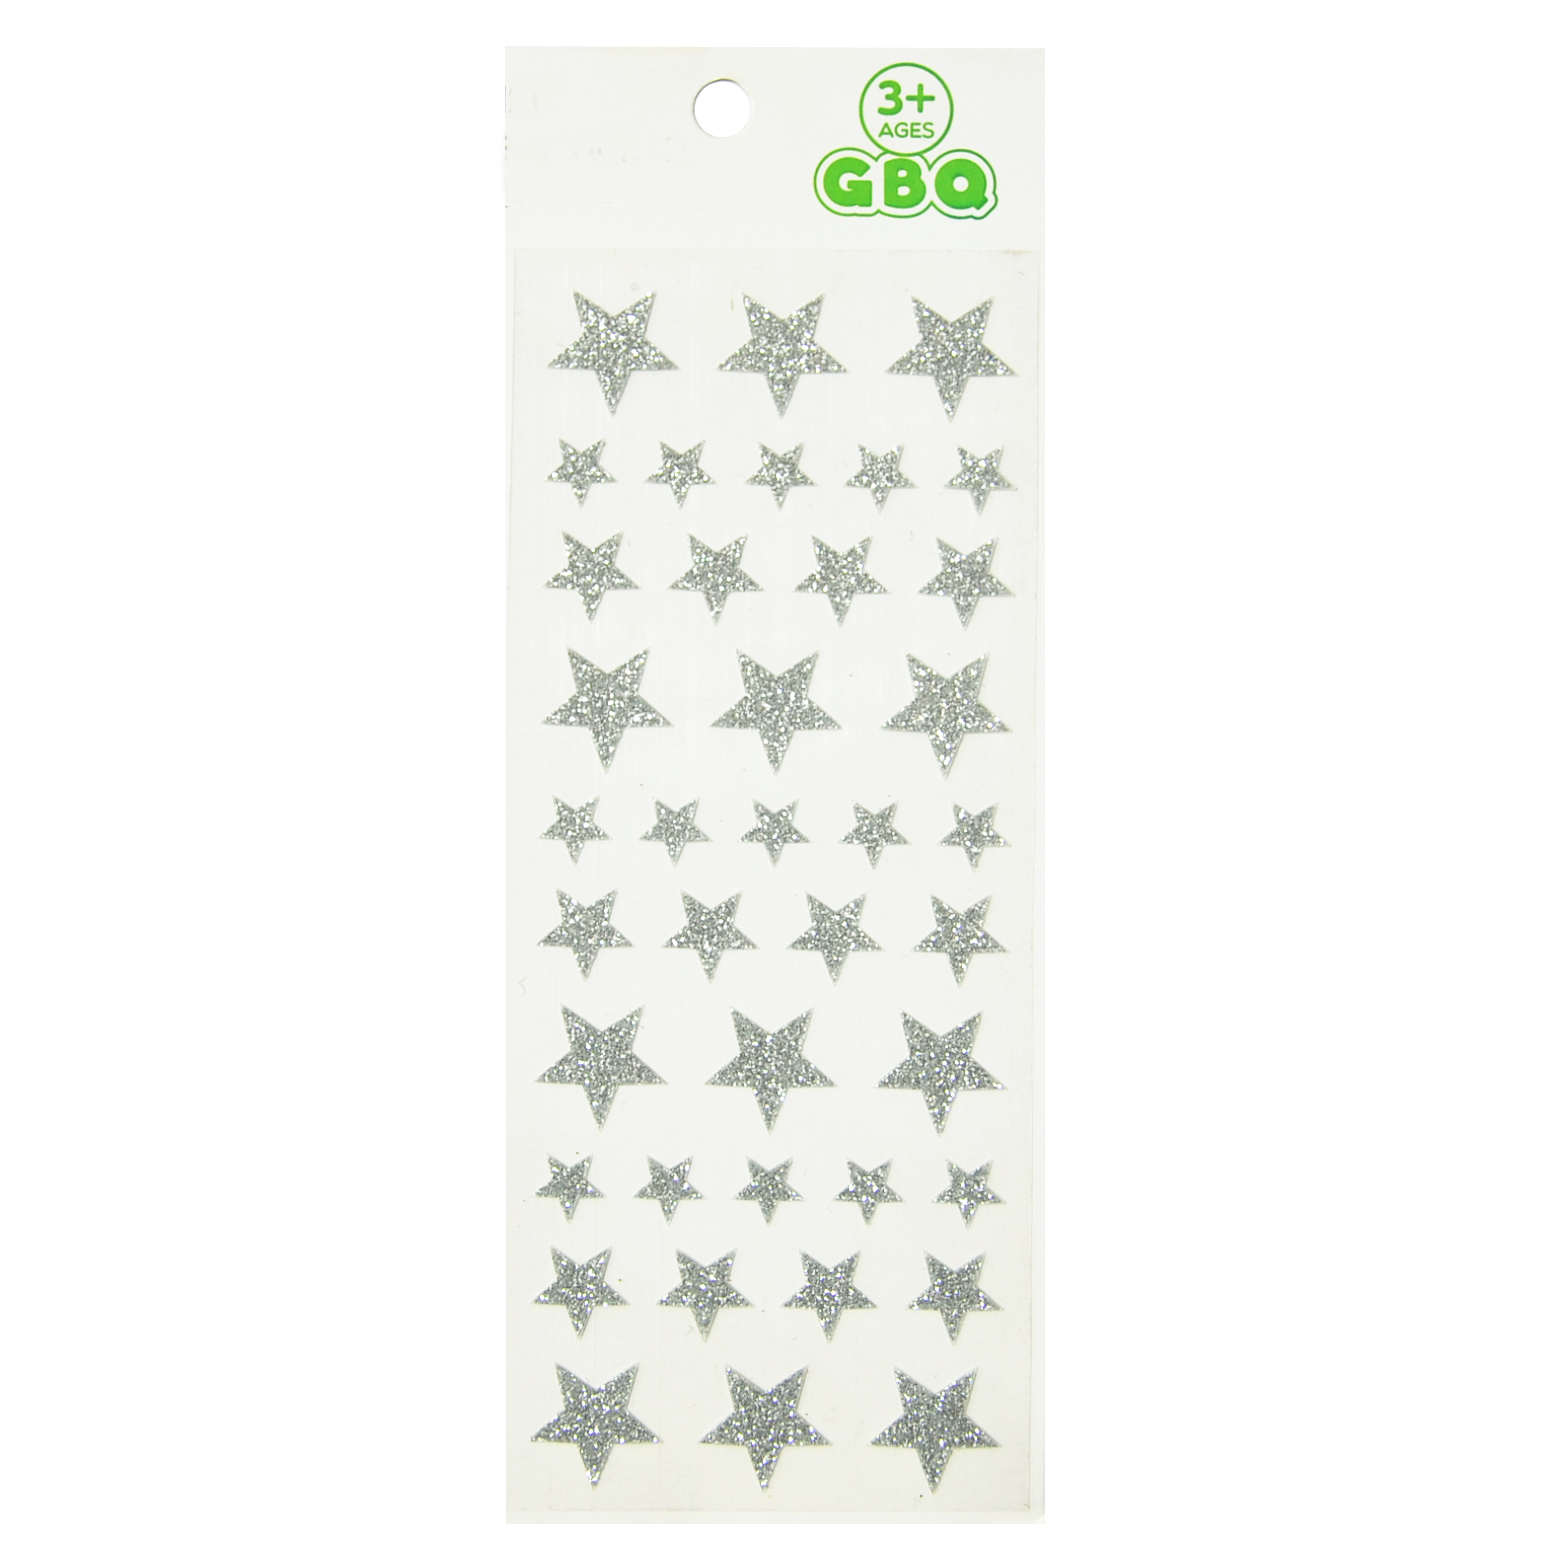 39pcs Silver Stars Removable Glitter Stickers Eco-friendly For Kids